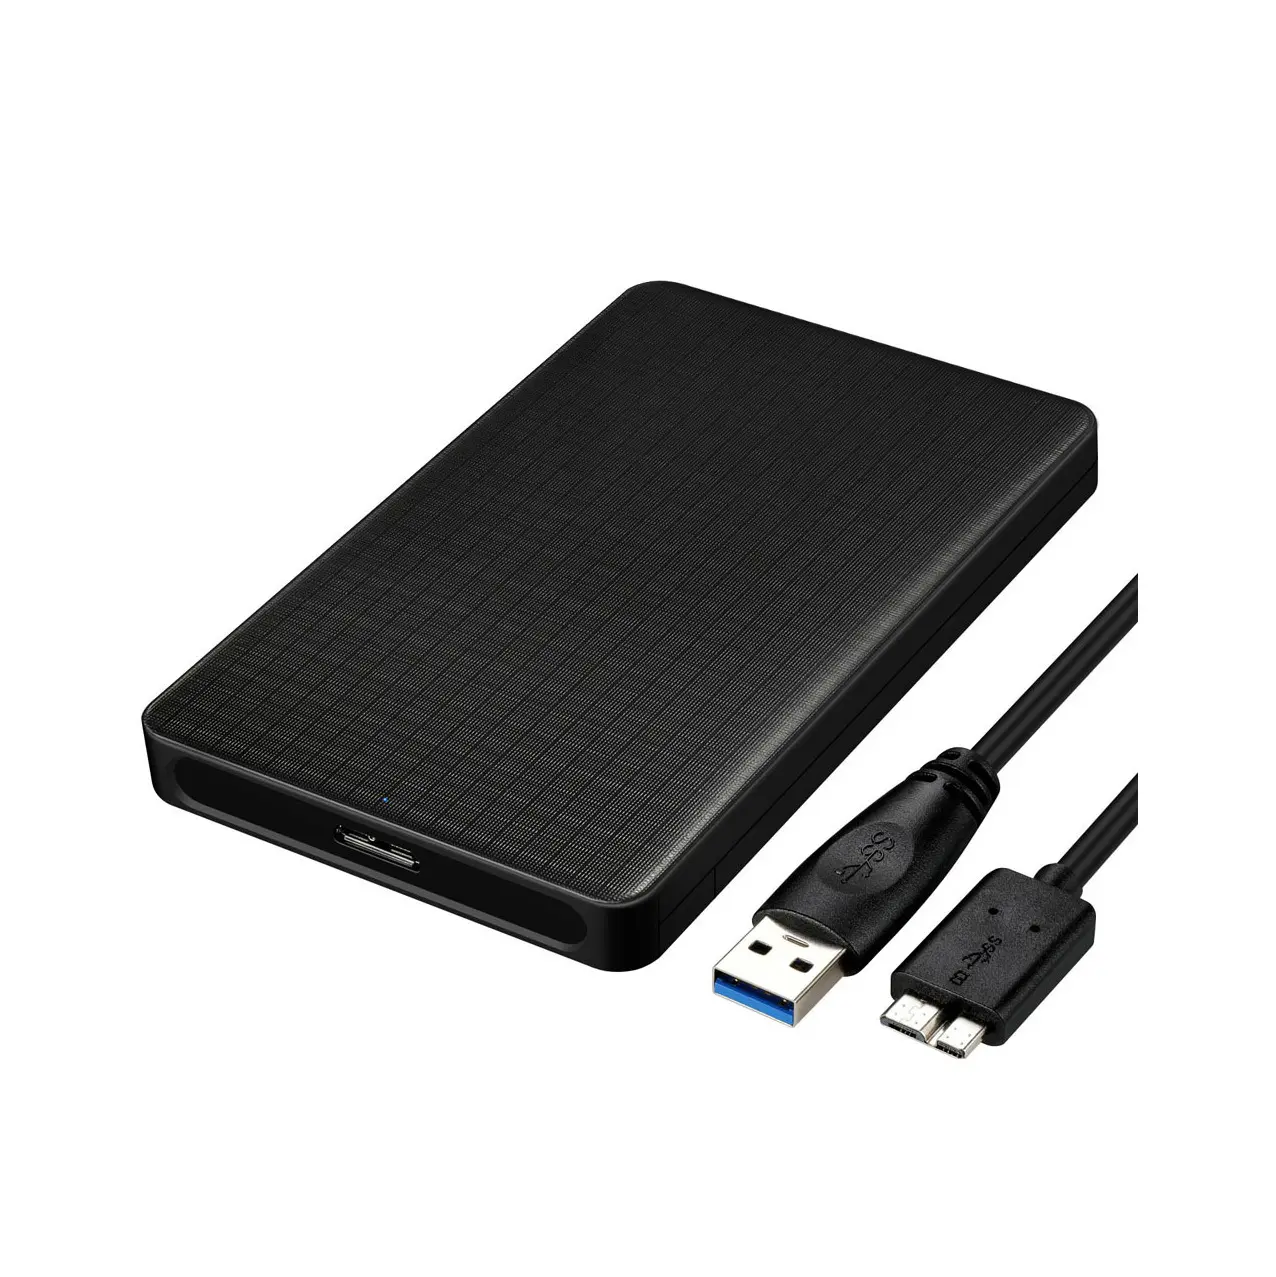 SSD Enclosure Case for SATA 2.5" Hard Drive Solid State Drive USB 3.0 Cable Black Aluminum Disk Box